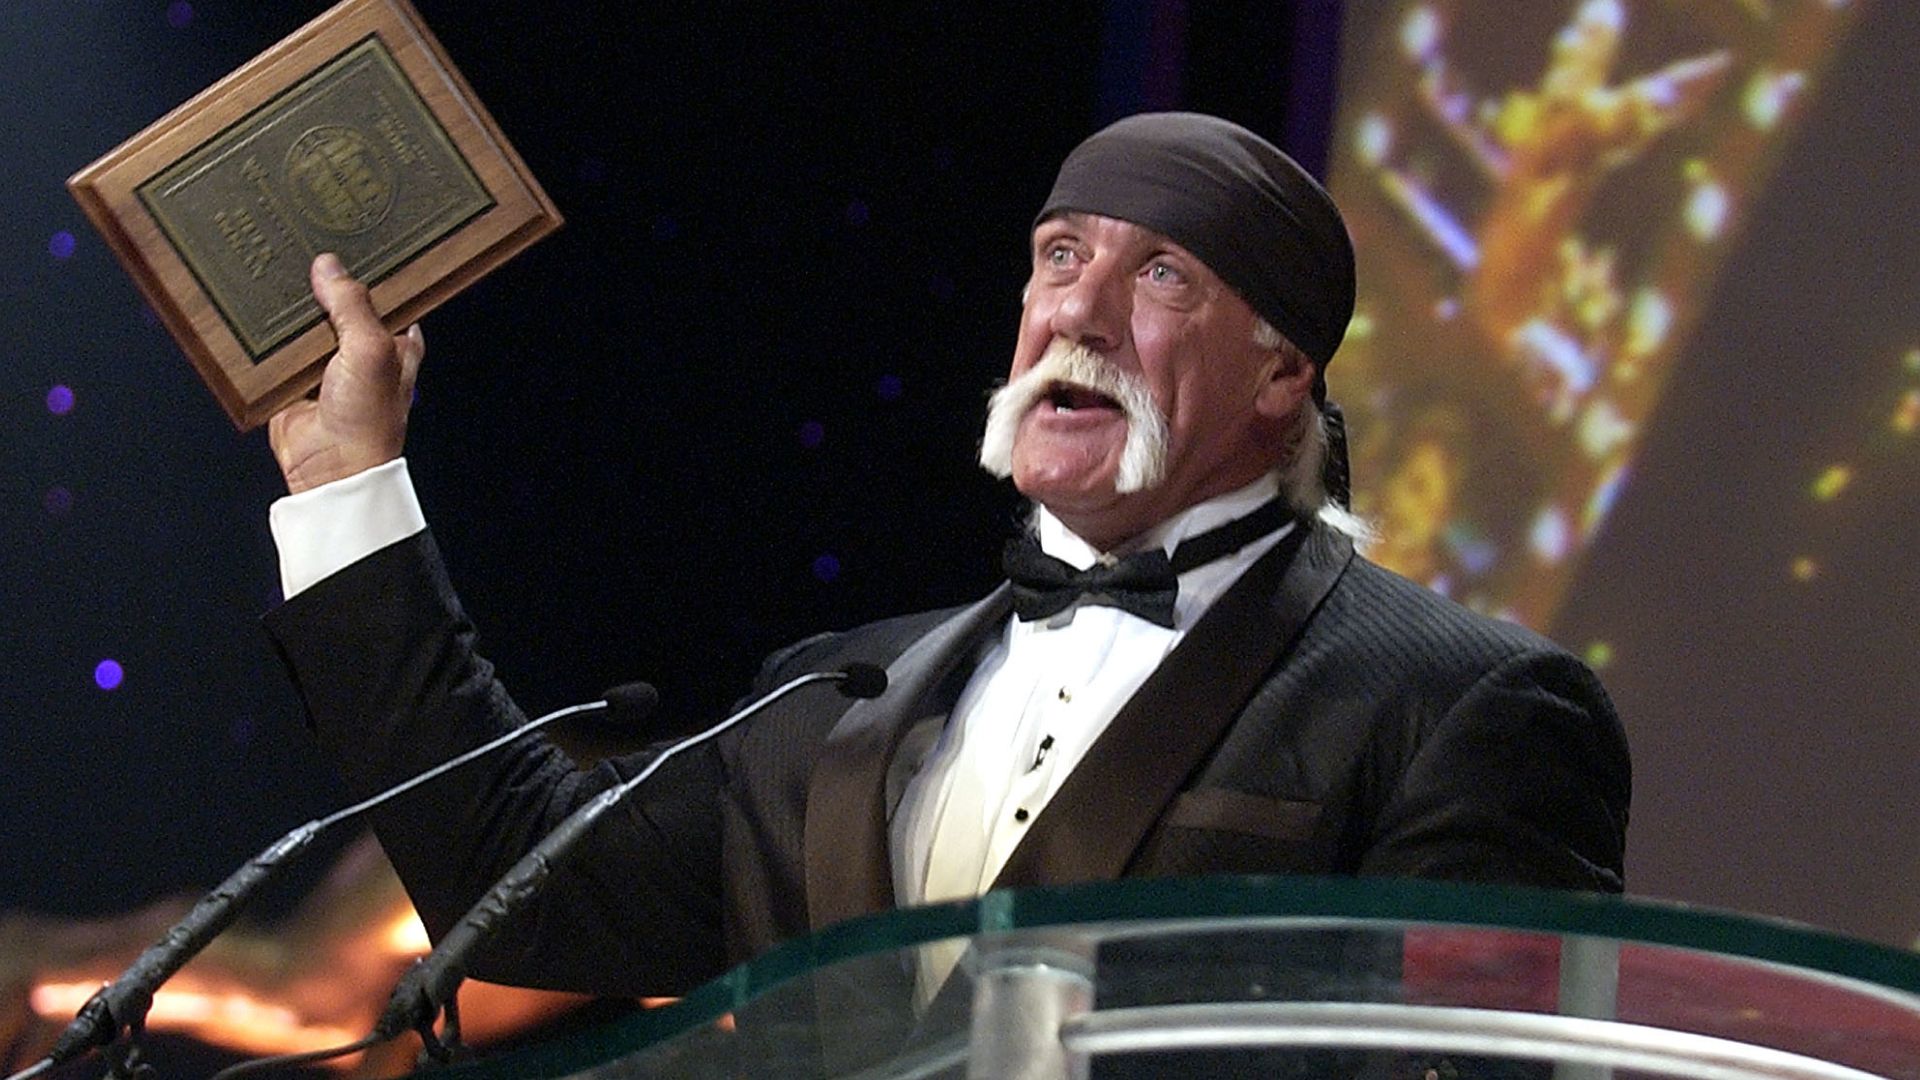 Hulk Hogan at the WWE Hall of Fame induction ceremony (2005)